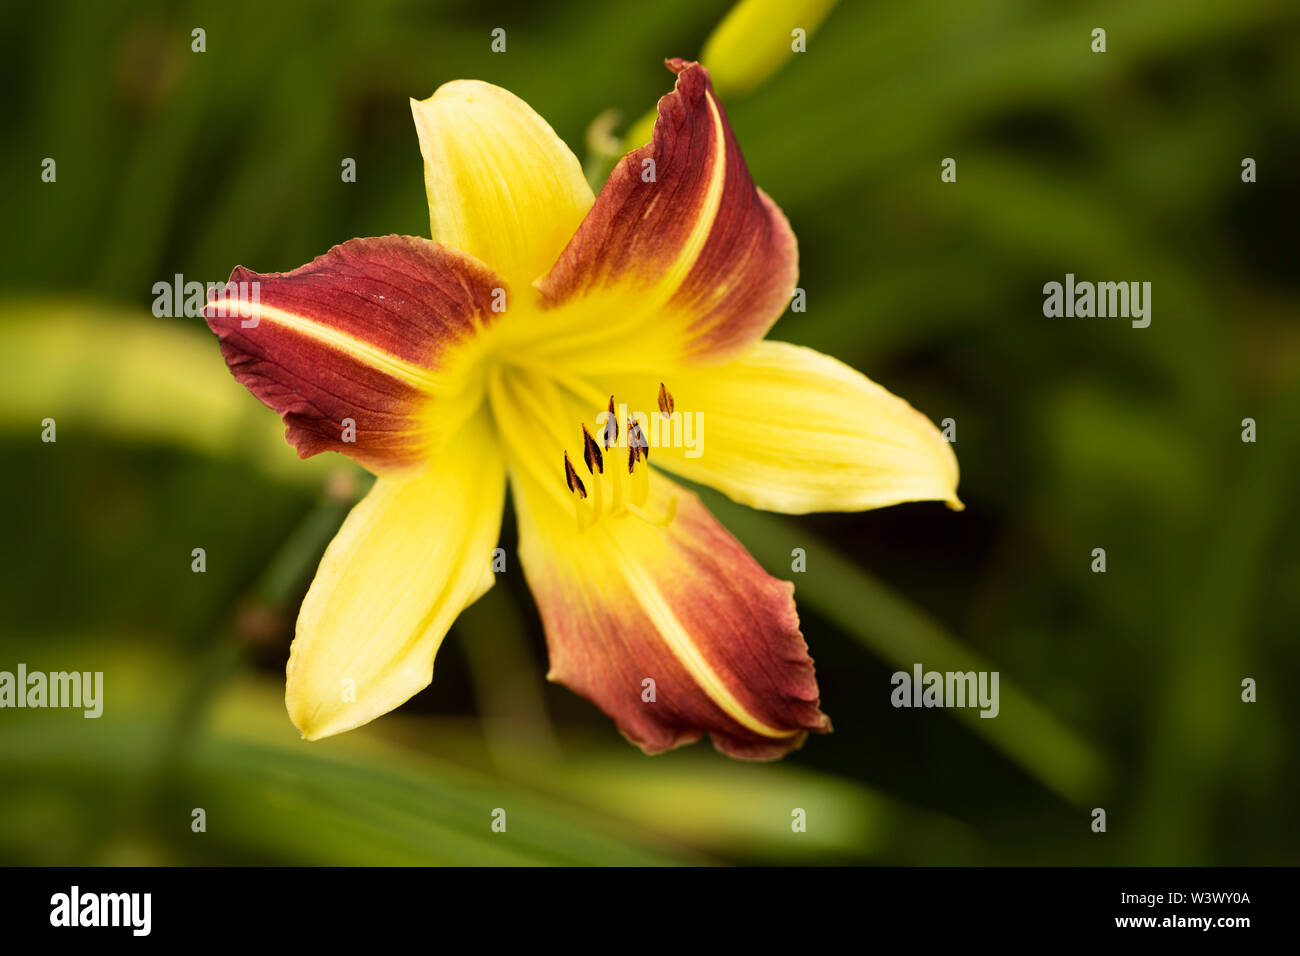 A red and yellow Hemerocallis daylily hybrid in variety Jean, blooming in a summer garden. Stock Photo